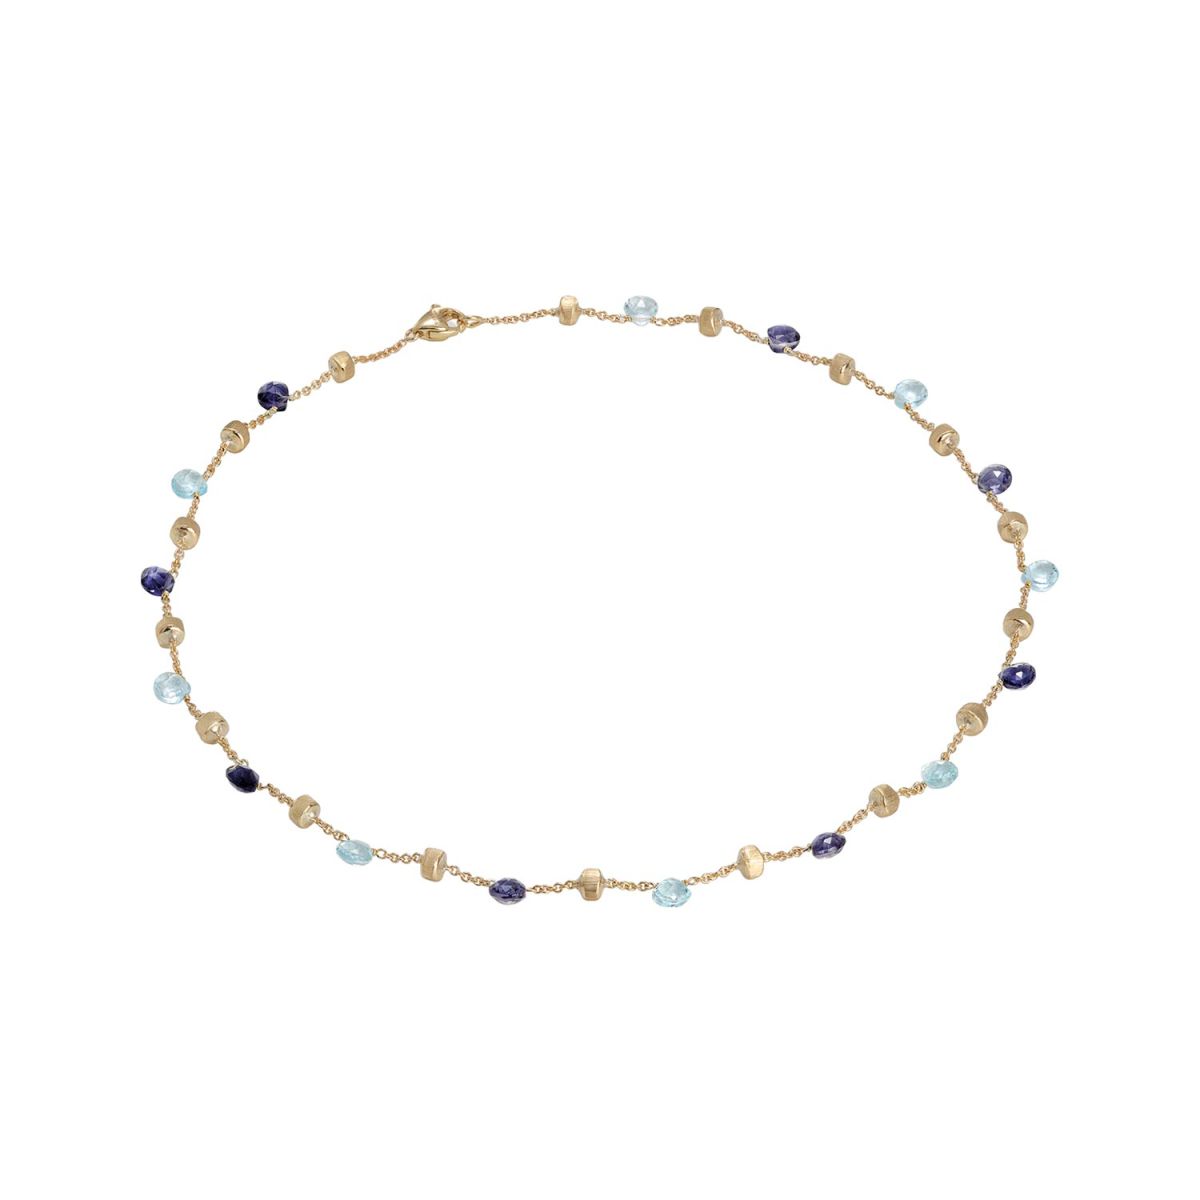 PARADISE COLLECTION 18K YELLOW GOLD MIXED STONE COLLAR NECKLACE